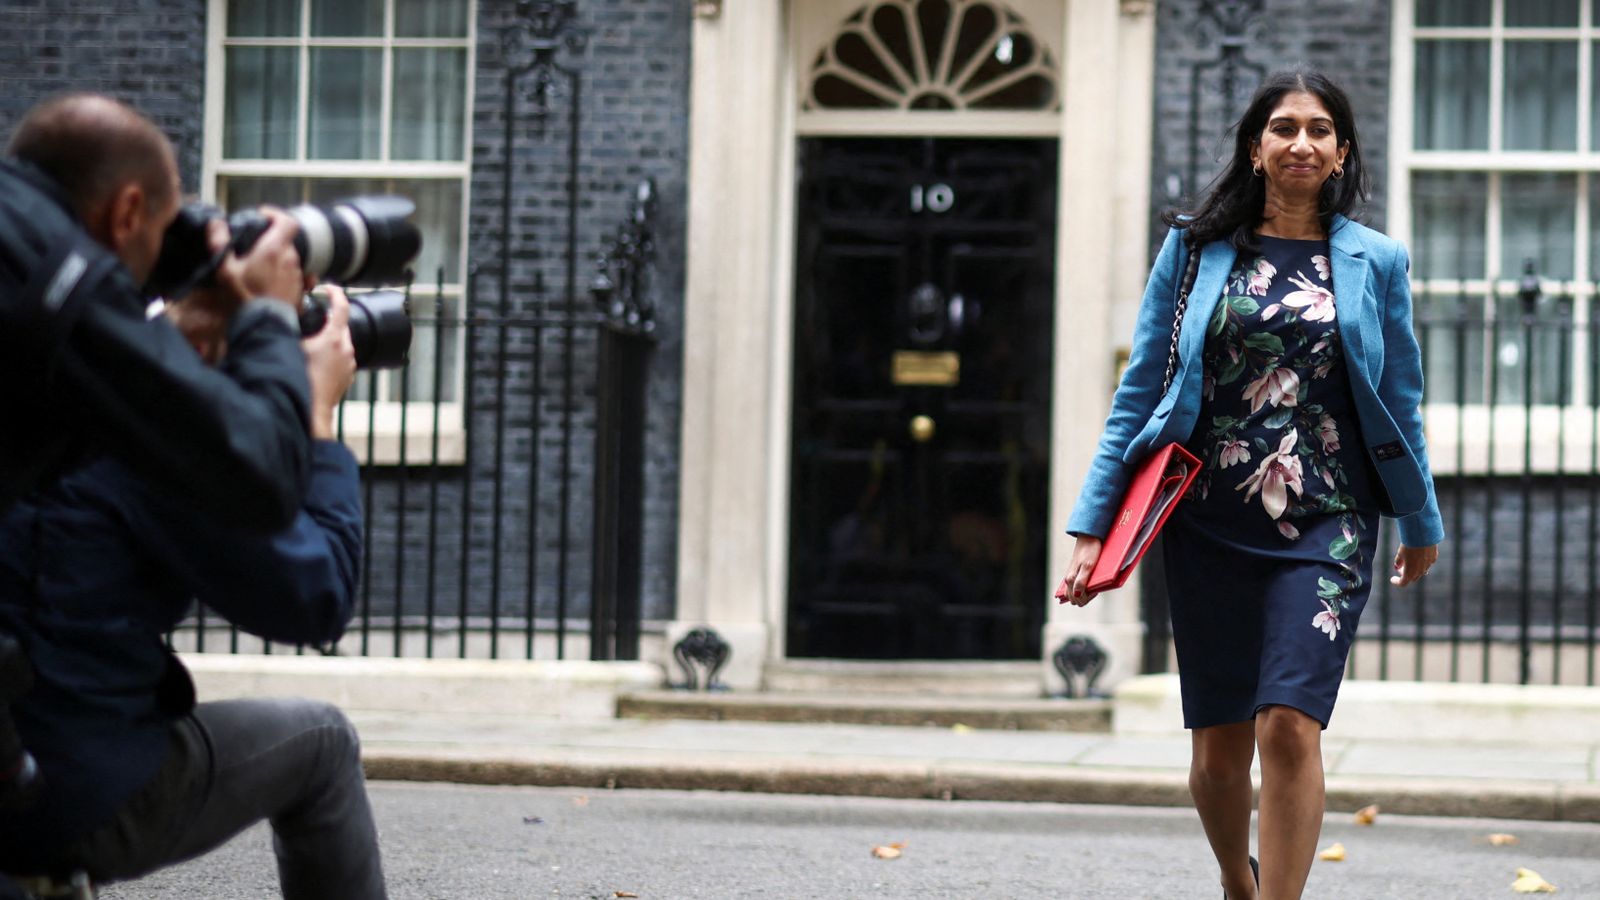 Michael Gove insists Suella Braverman is 'first-rate politician' as pressure mounts over reappointment